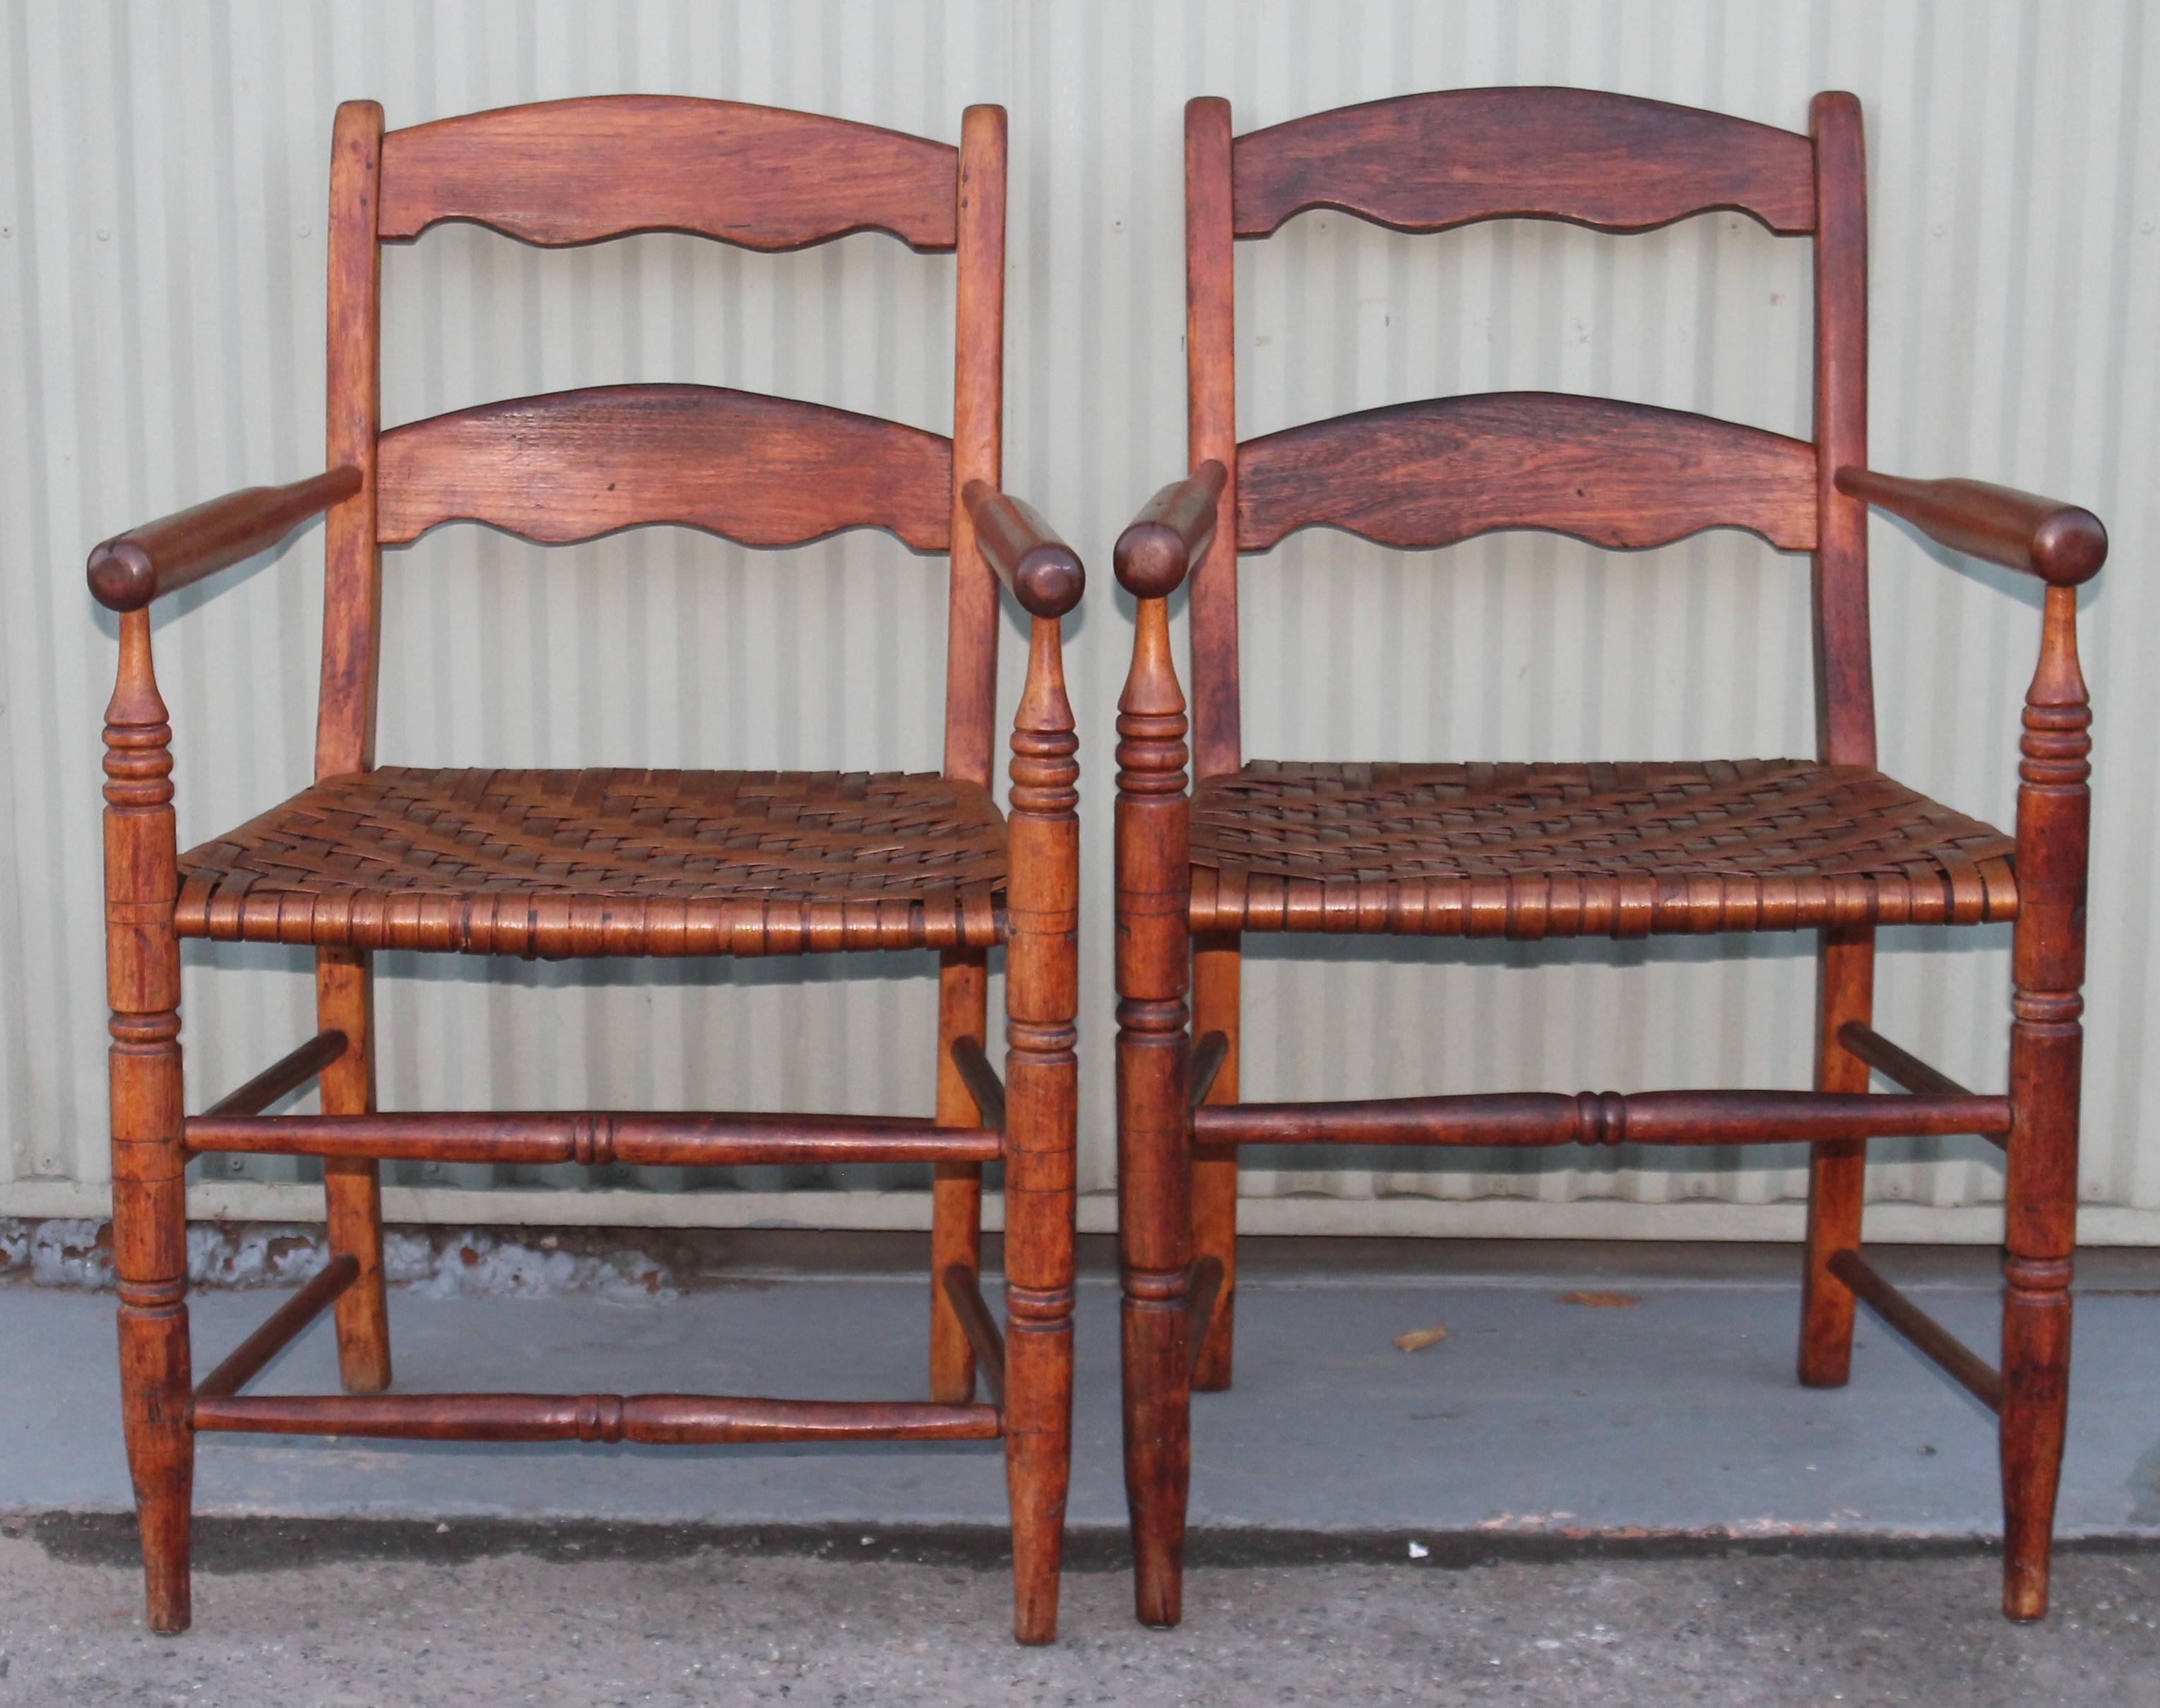 Hand-Crafted 19th Century Hickory Chairs with Original Rush Seats, Pair